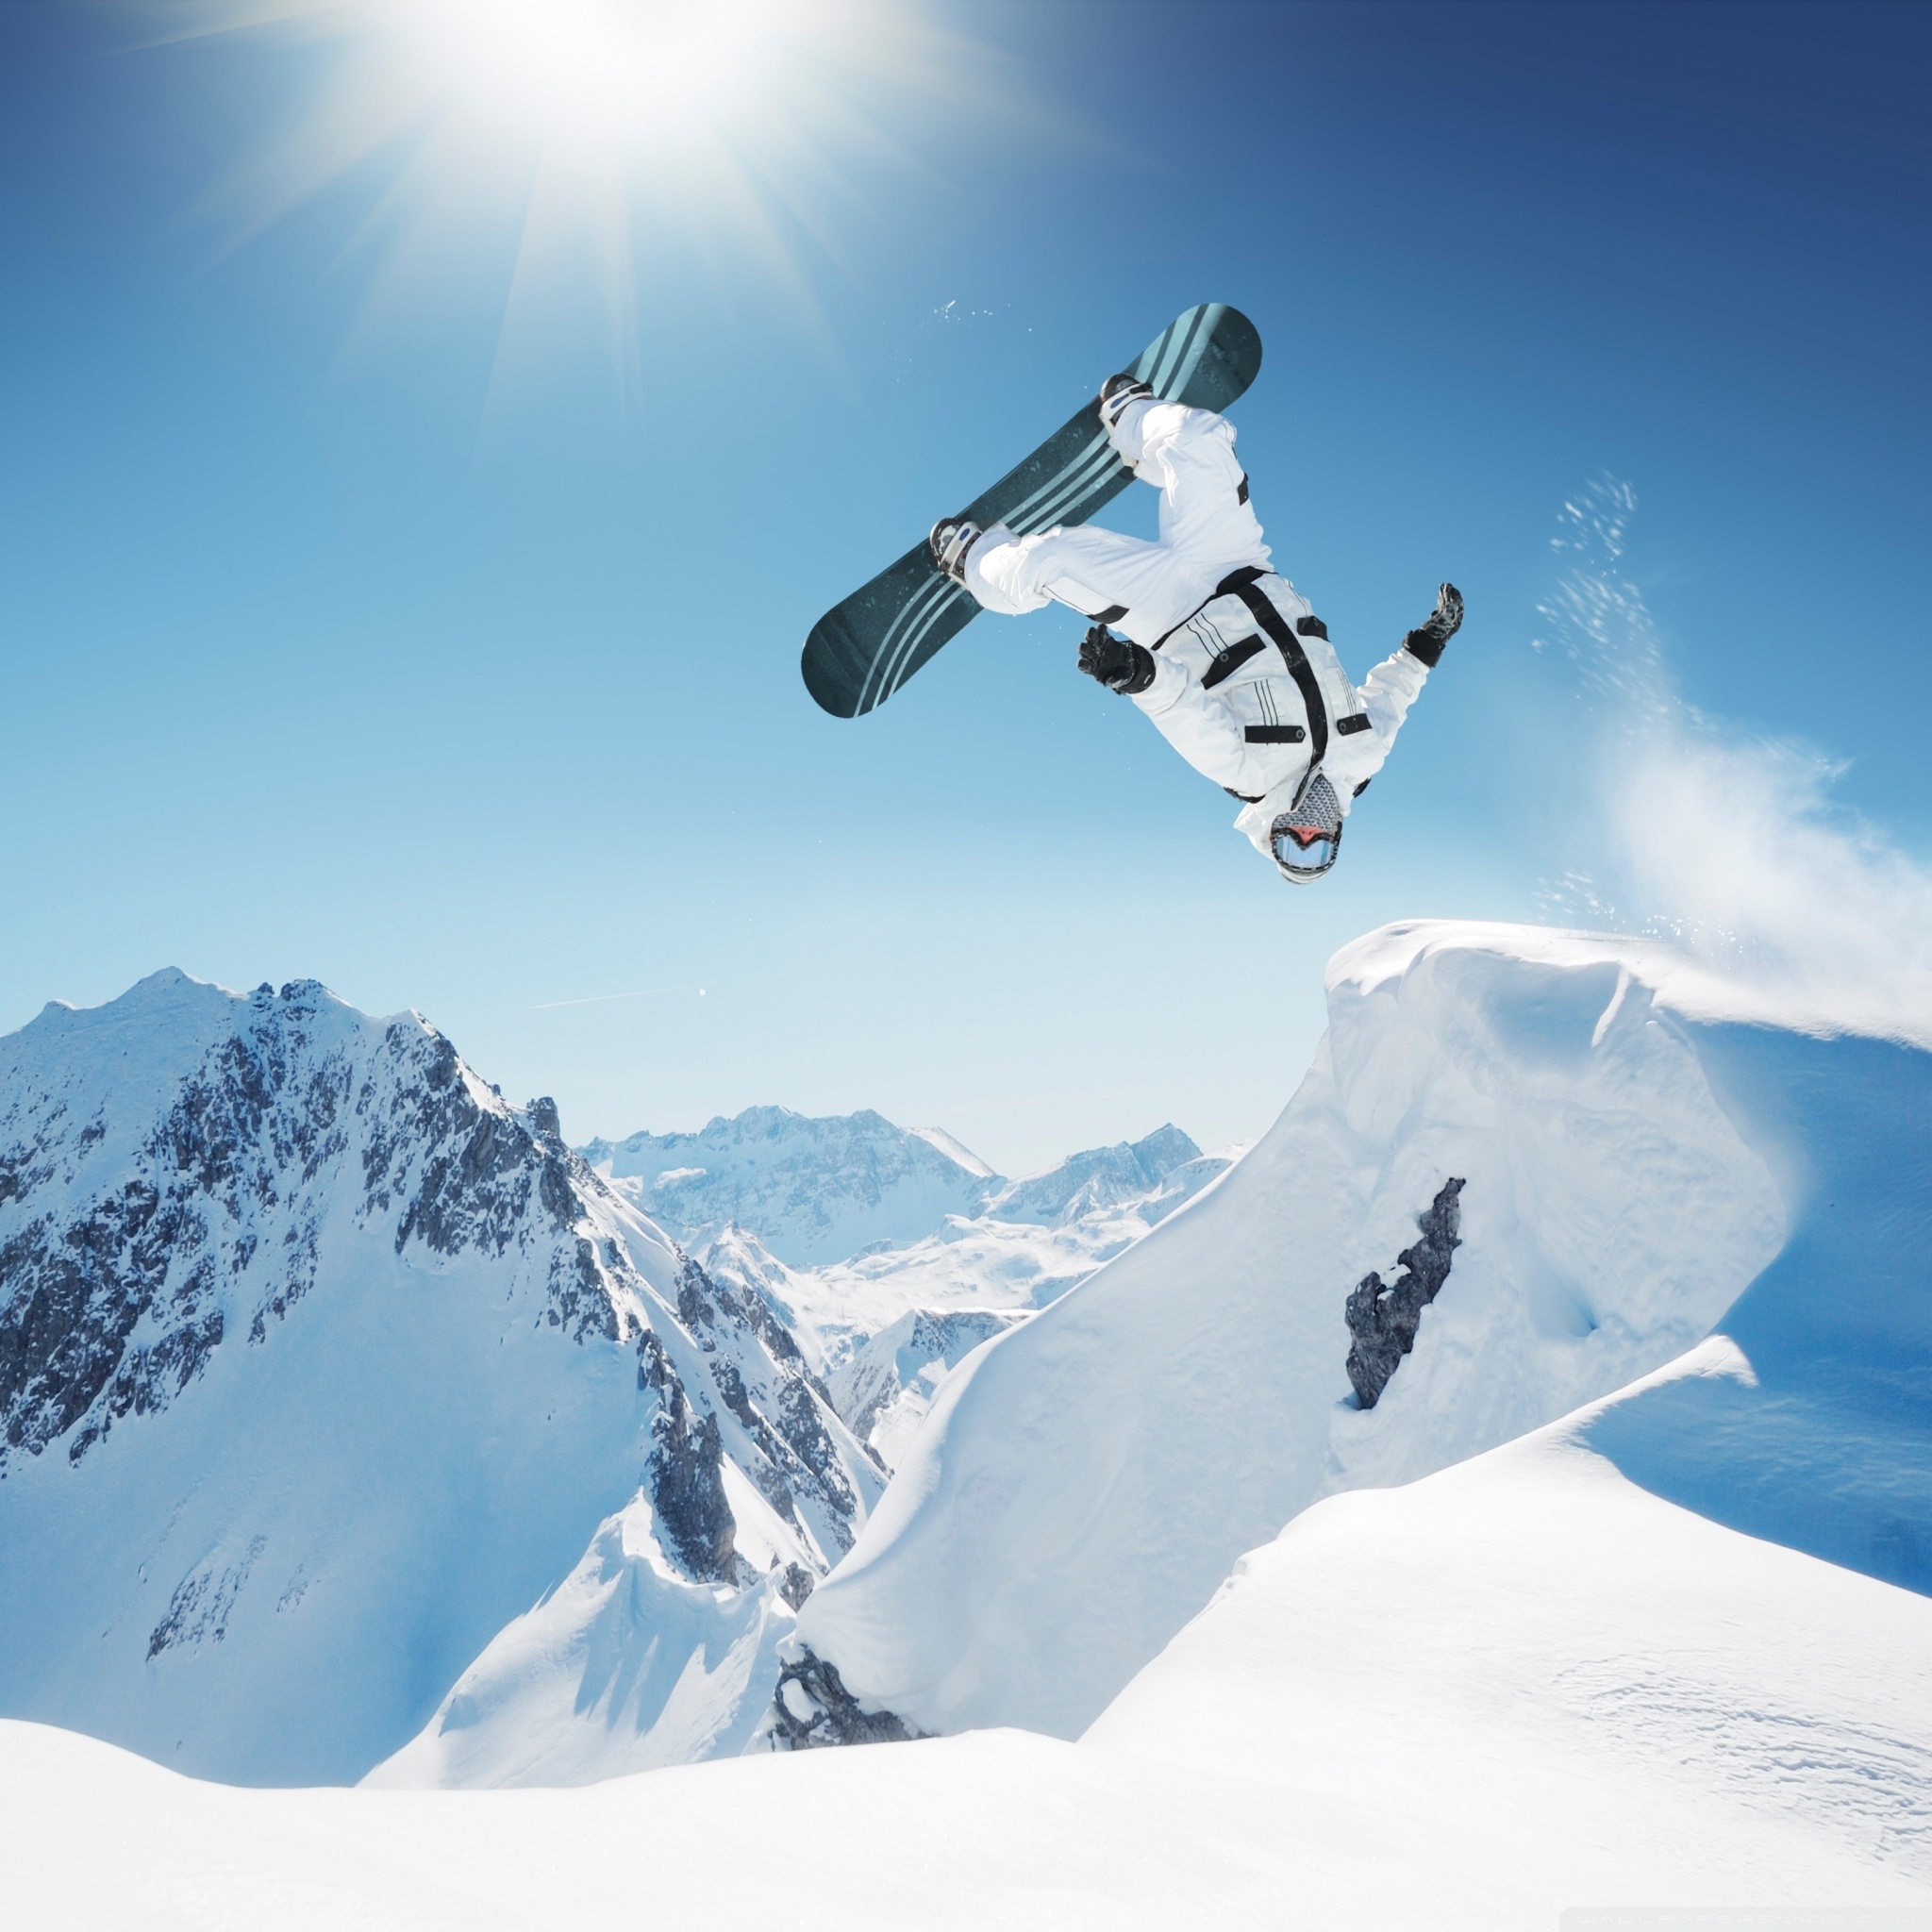 Ipad - Extreme Snowboarding , HD Wallpaper & Backgrounds